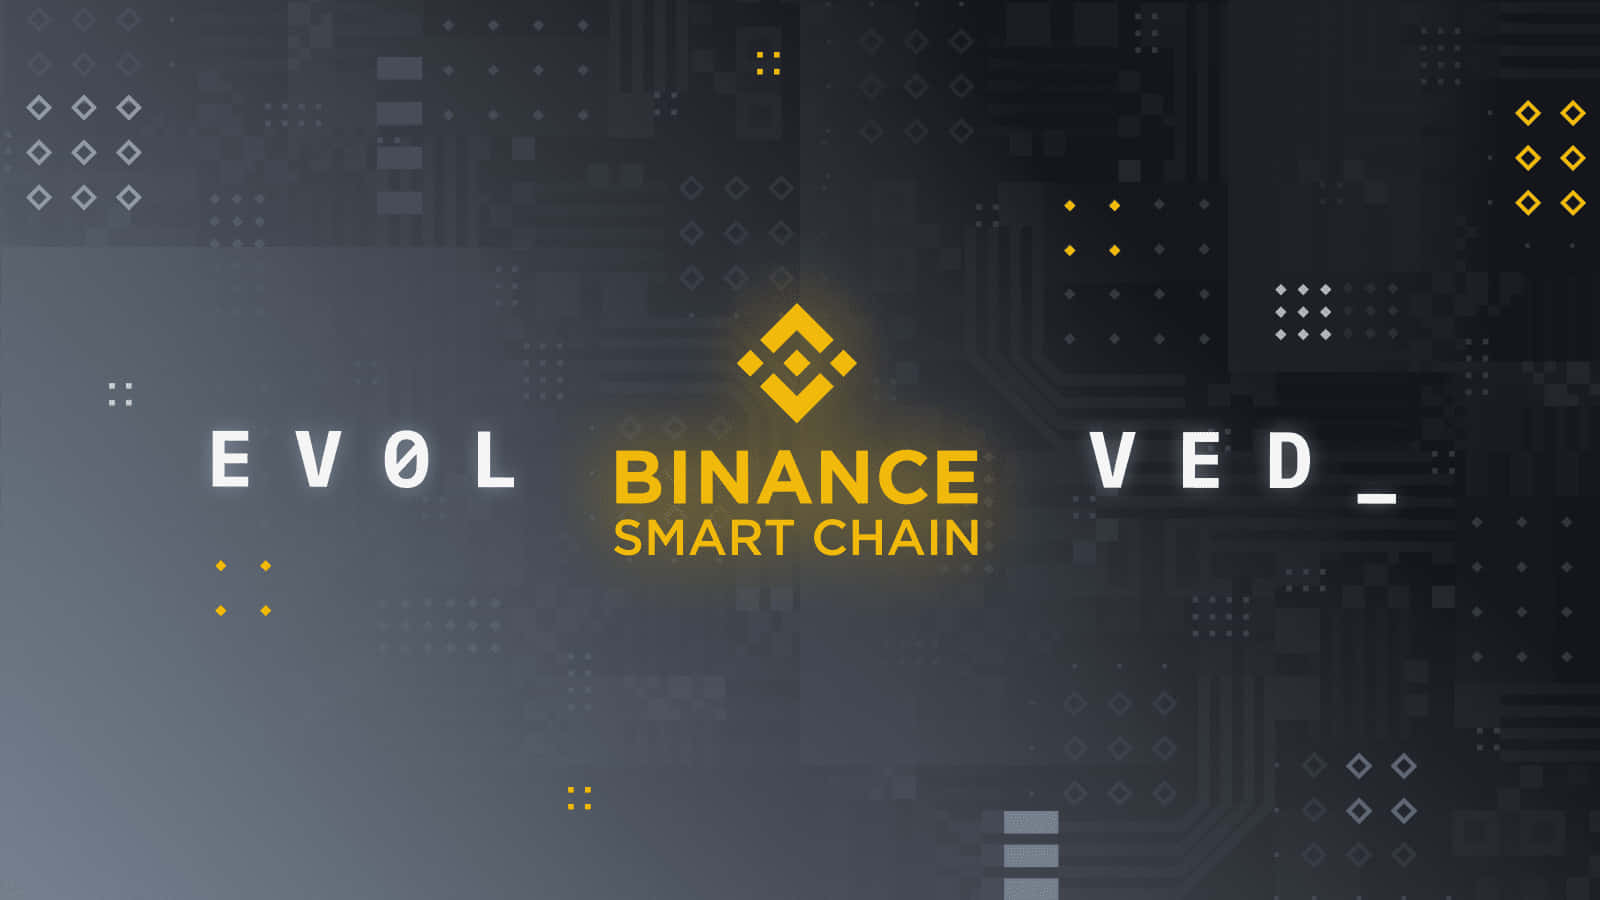 Take control of your finances with Binance